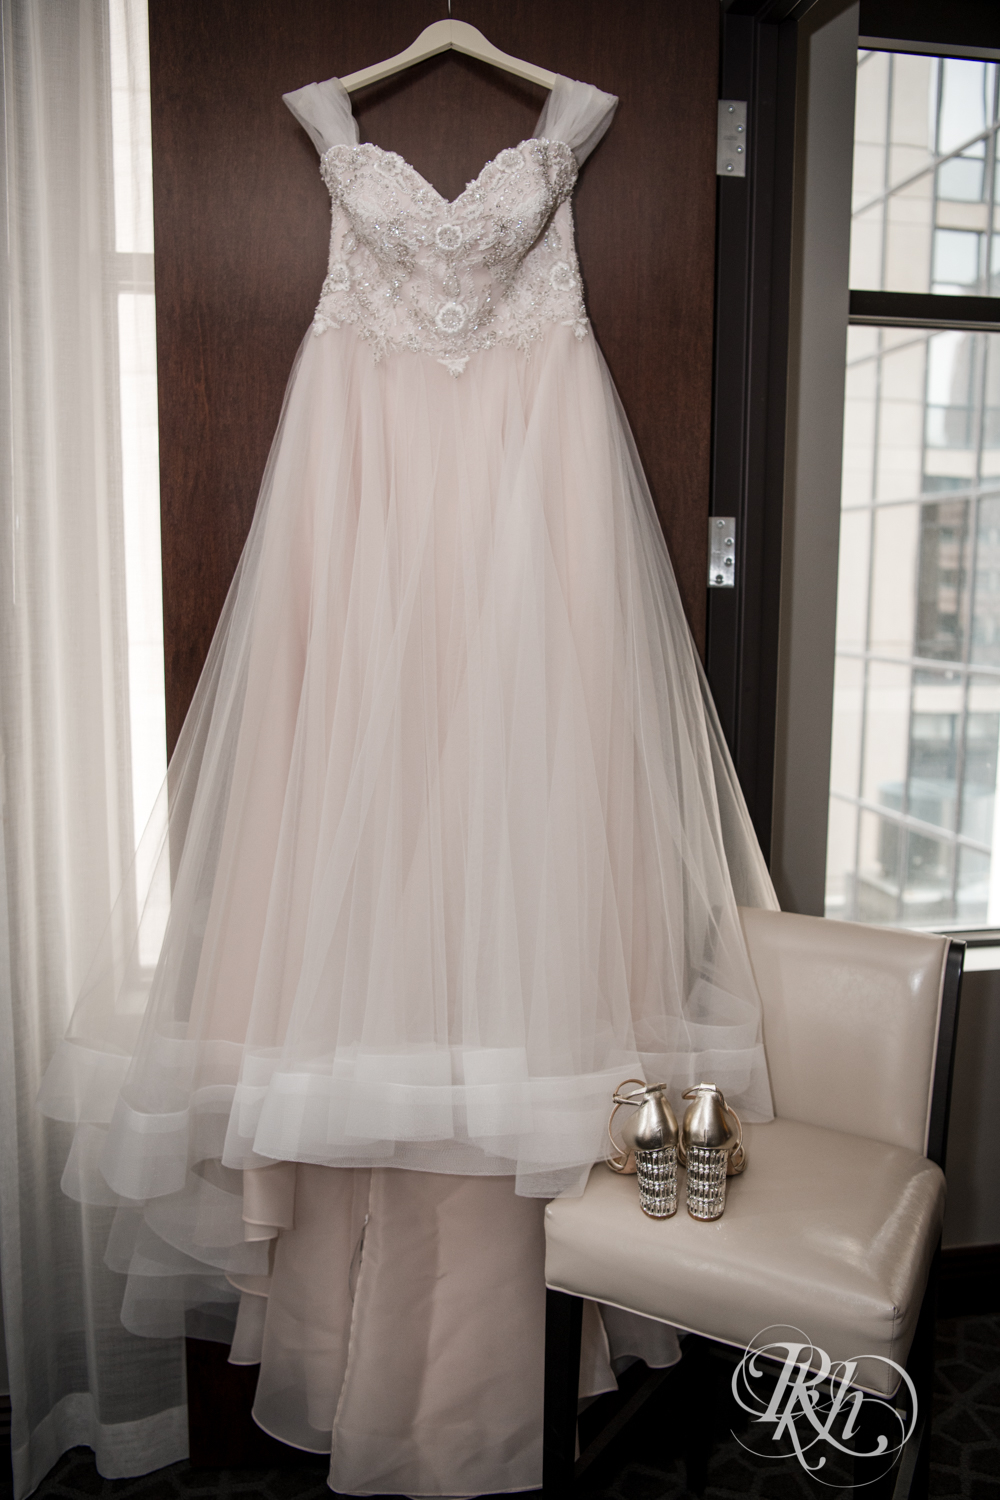 fairy tale dress and shoes